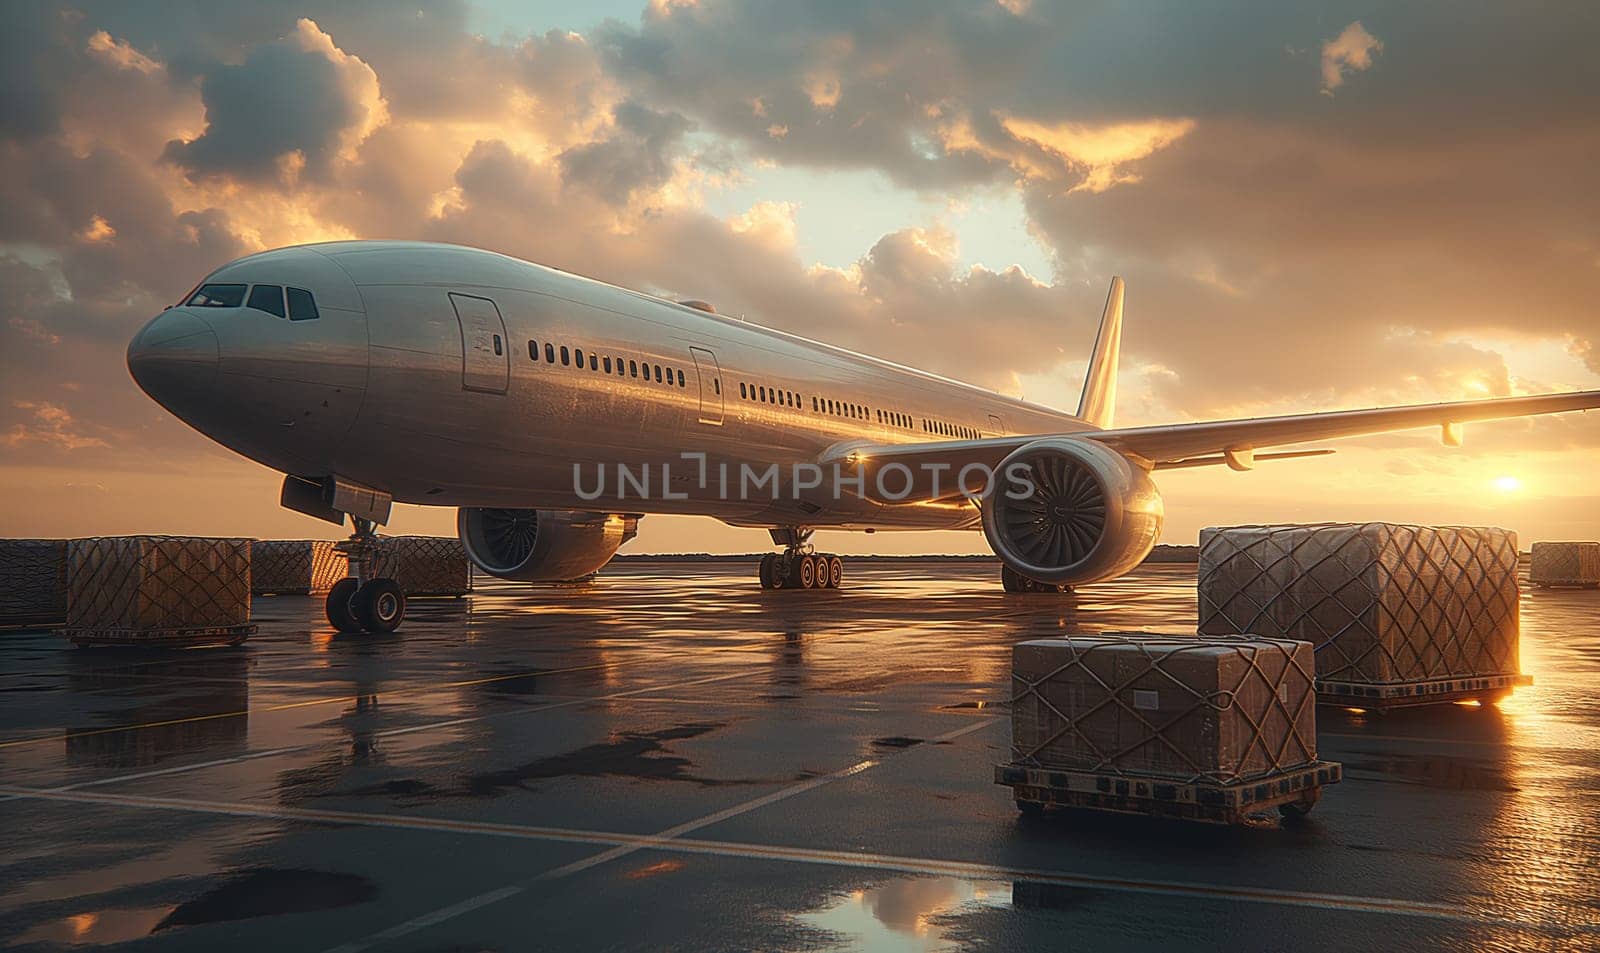 Sunset View of Airplane on Wet Tarmac. Selective focus.